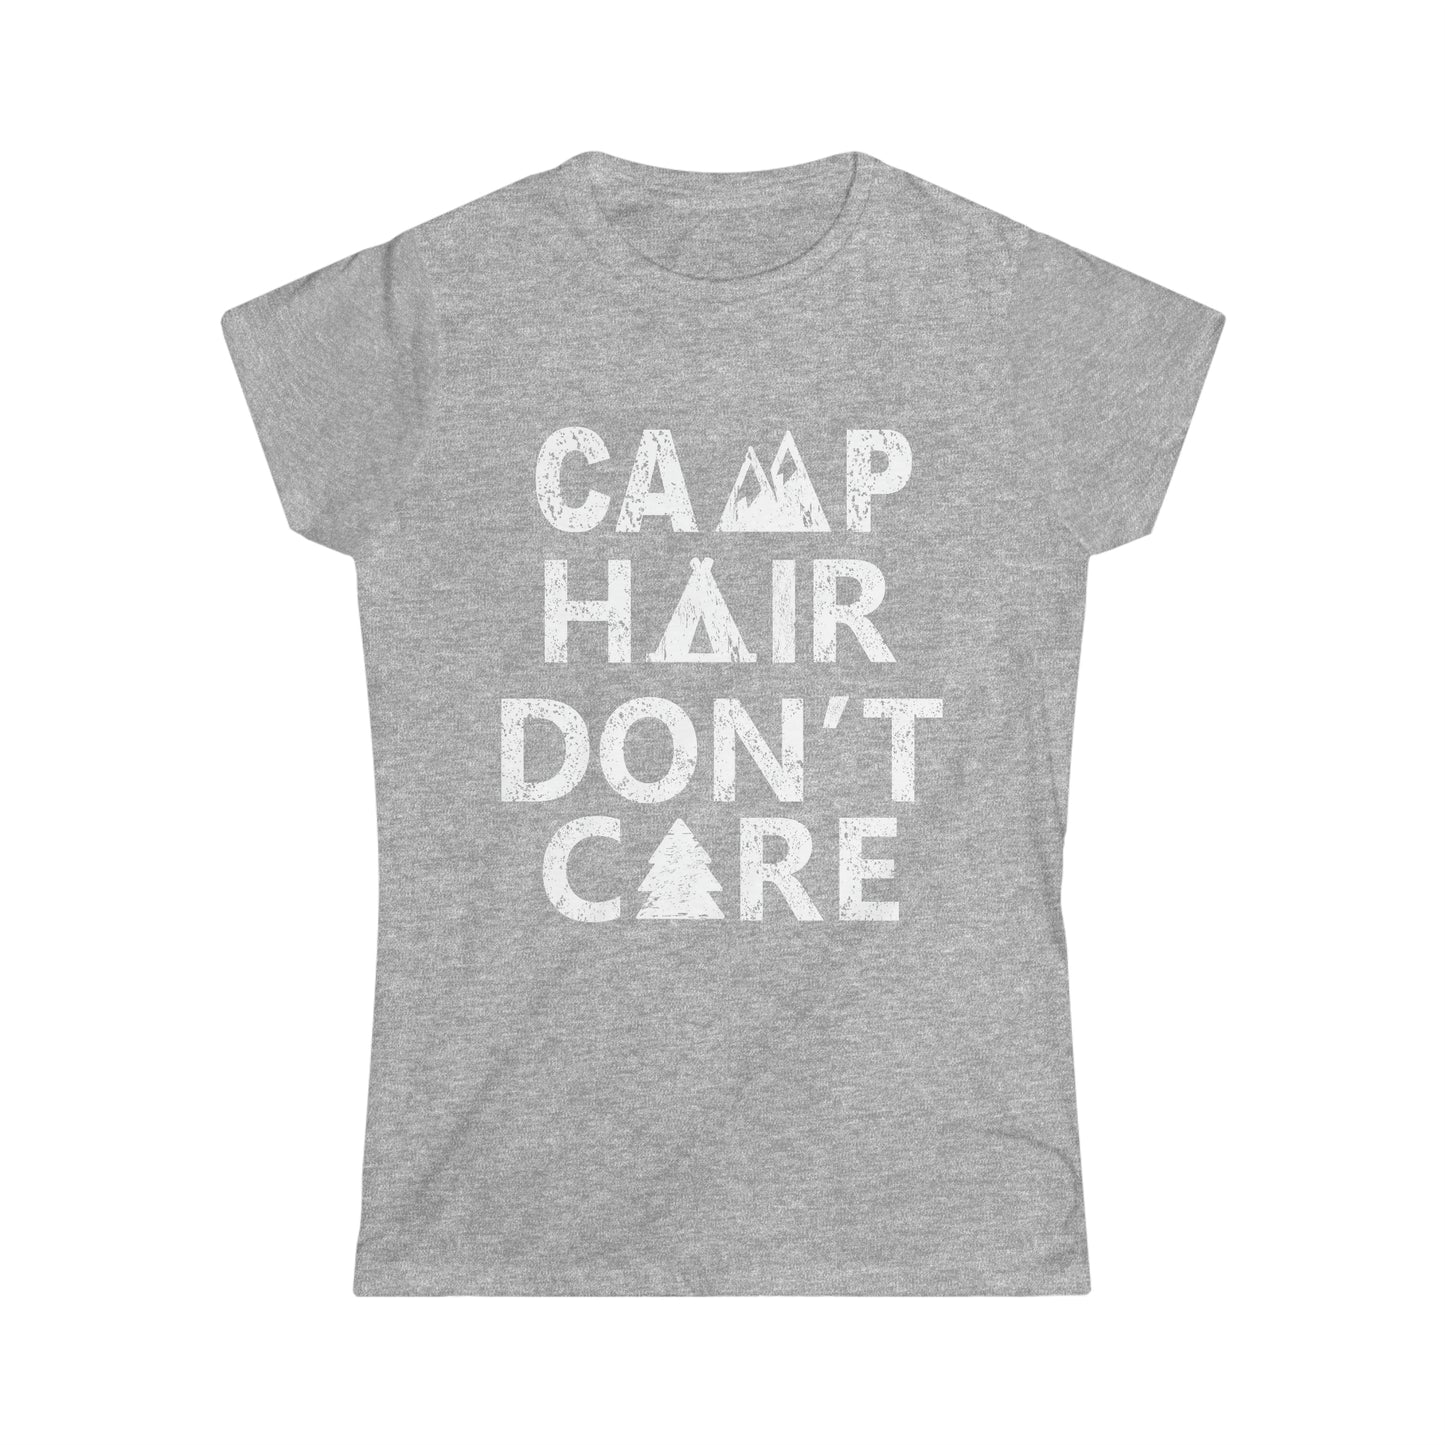 "Camp Hair Don't Care" Women's Softstyle Tee